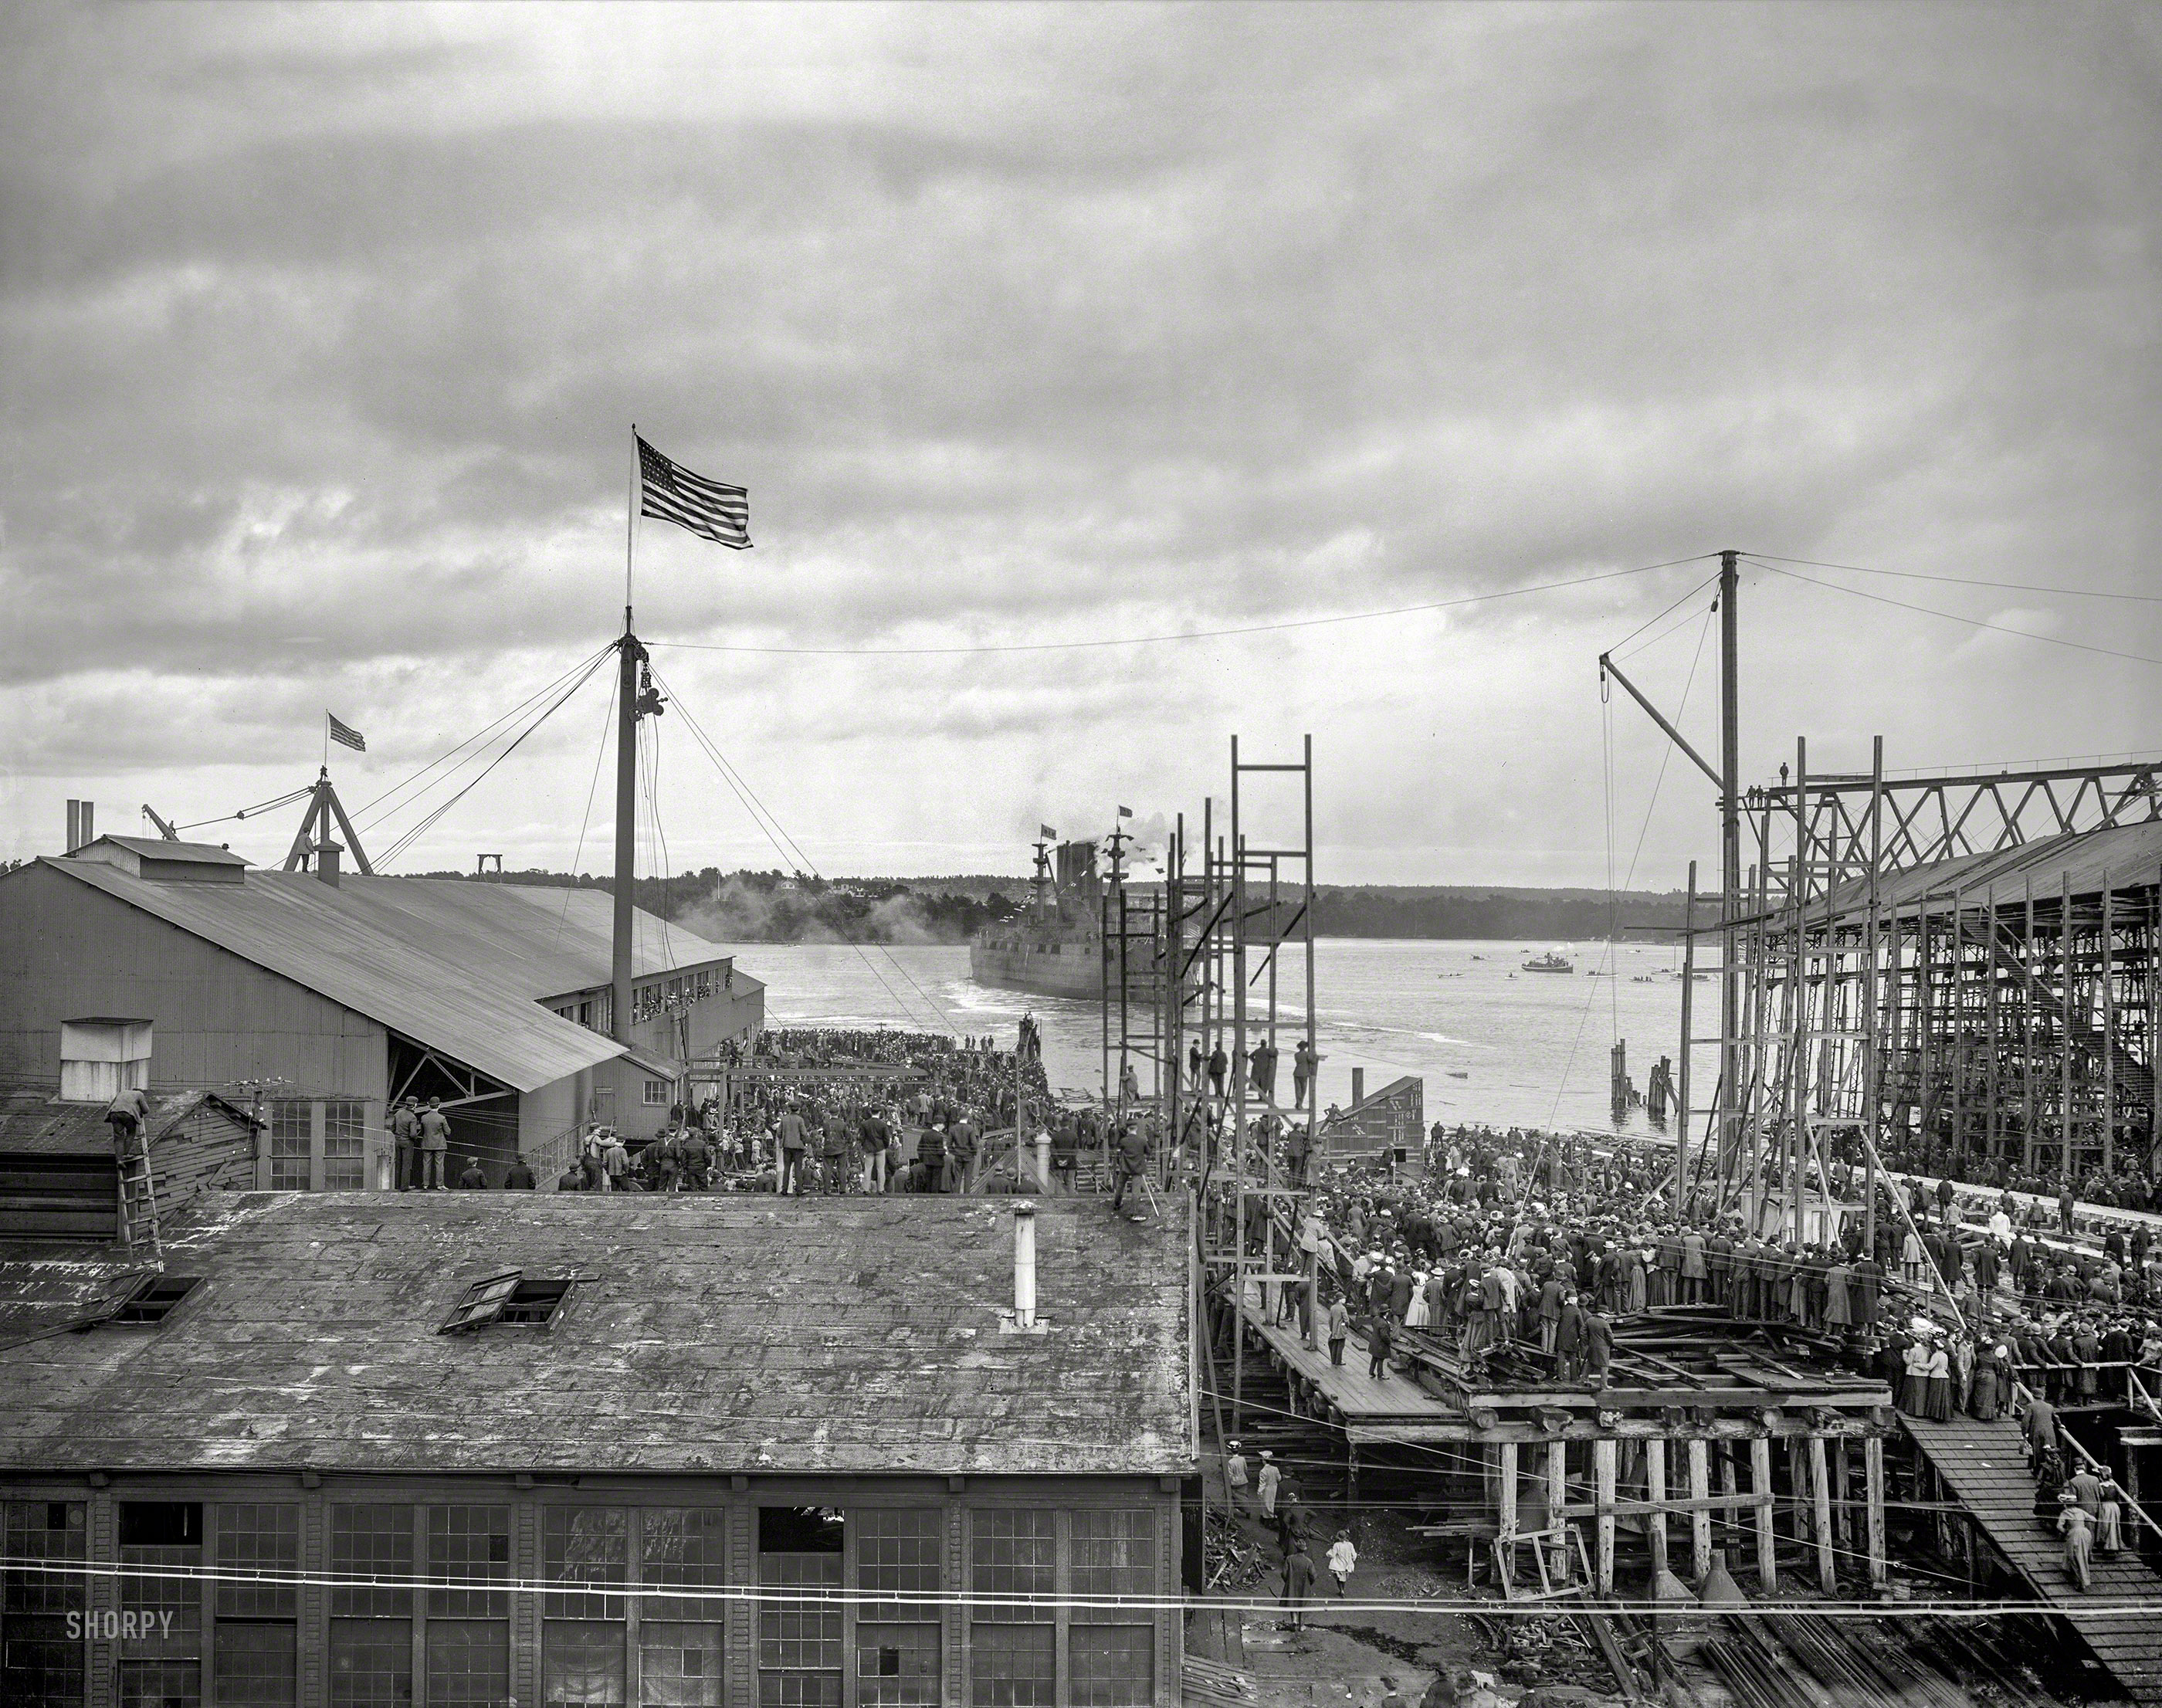 October 11, 1904. Bath, Maine. "In the stream -- launch of the U.S.S. Georgia at Bath Iron Works." 8x10 inch dry plate glass negative. View full size.